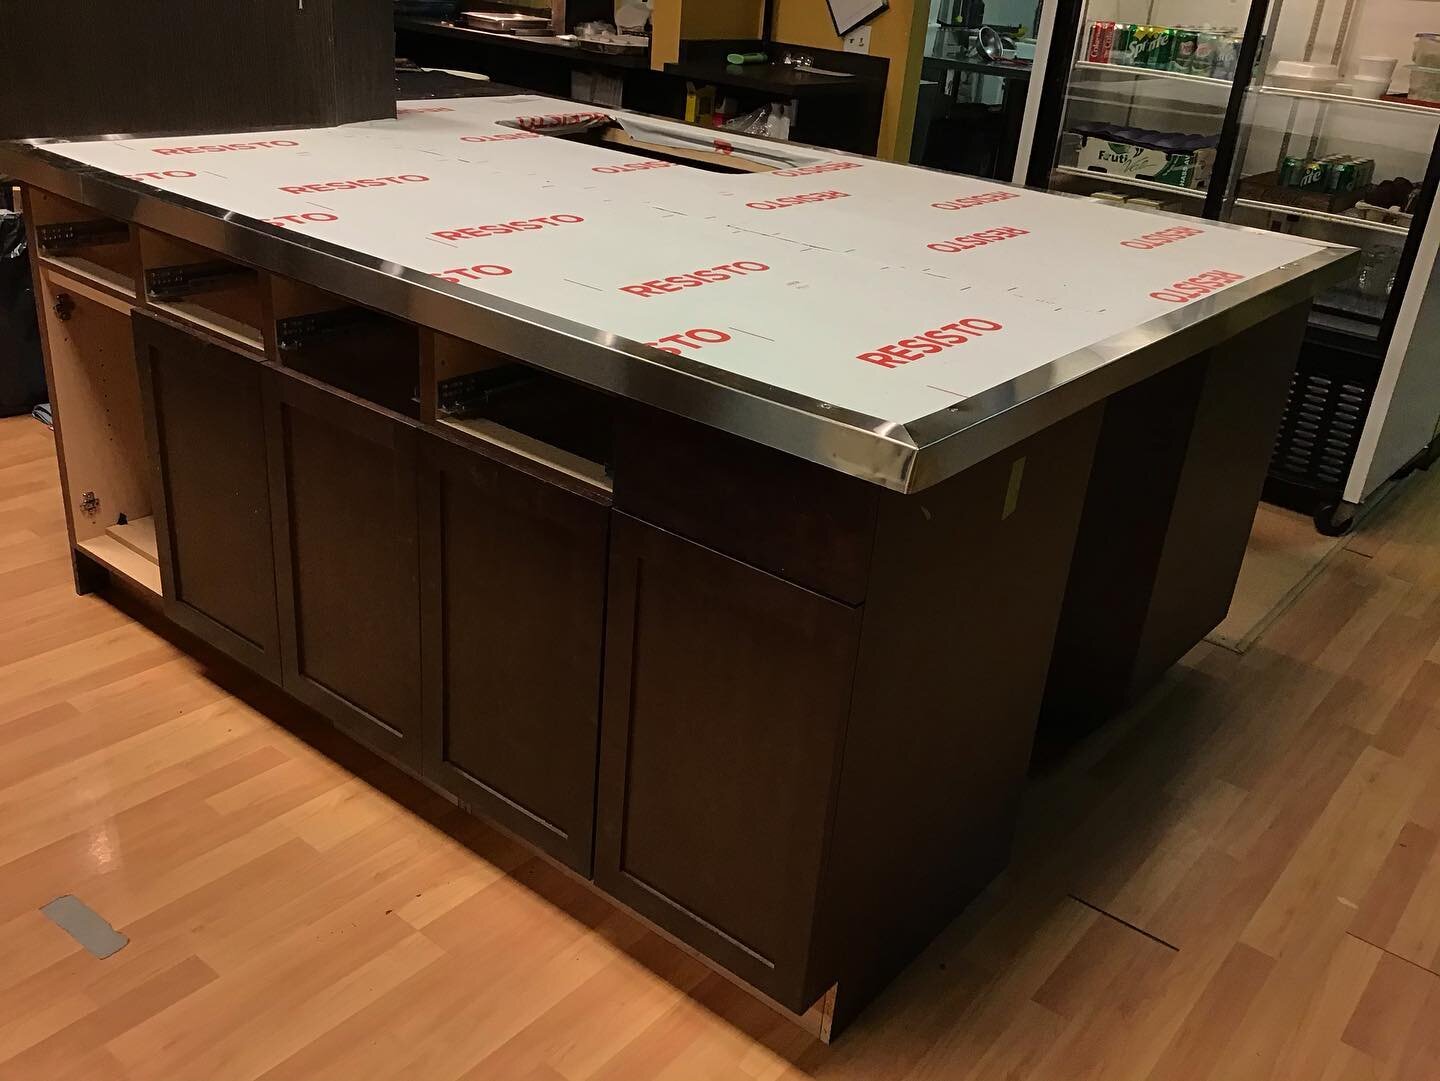 New sushi bar and Server takeout station coming soon!!🌟 Super exciting! 🥢🍣
#renovations #moresushi #sushitime